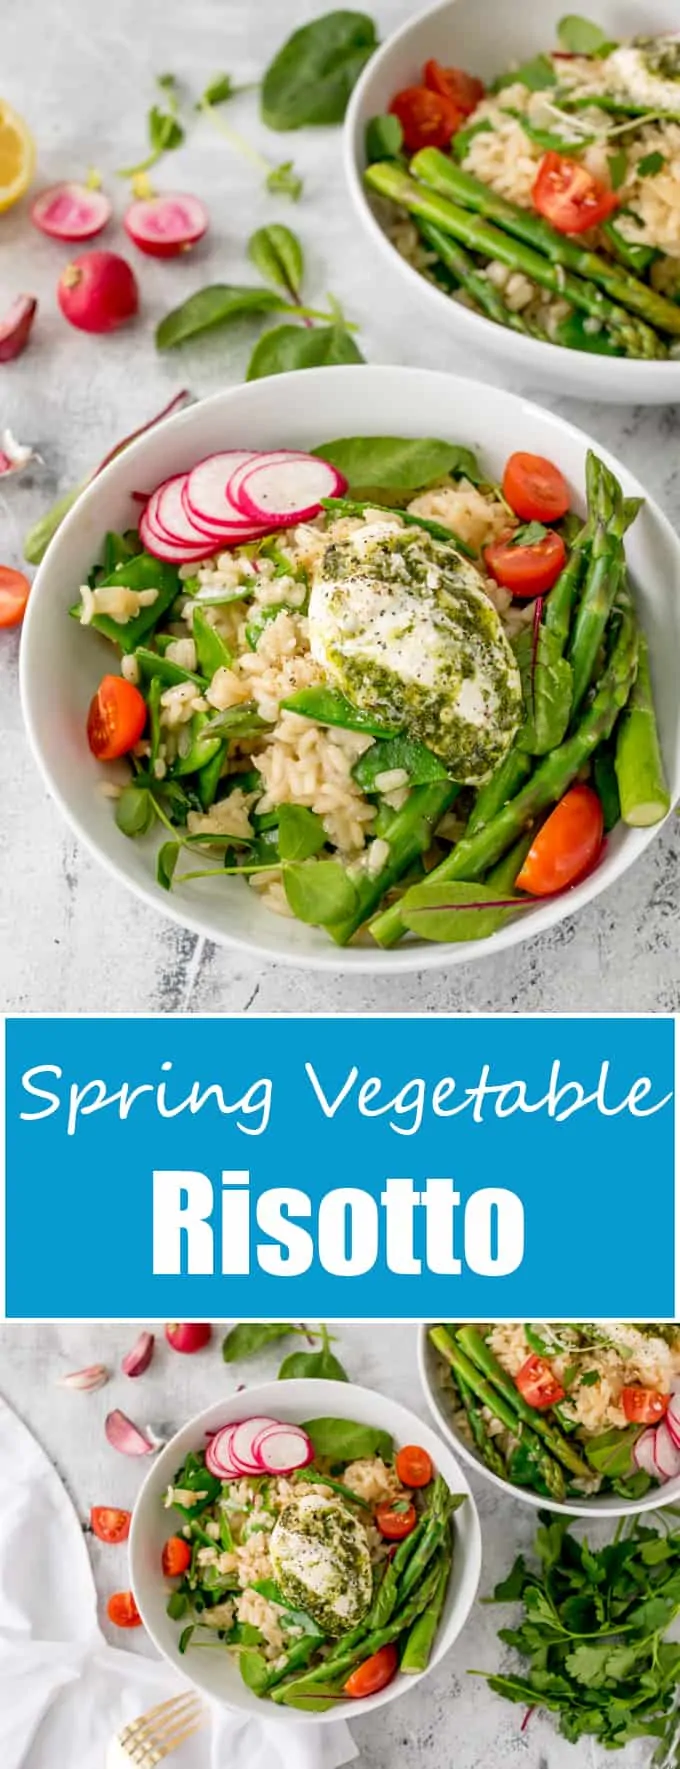 This Spring Vegetable Risotto with Creamy Pesto is creamy, cheesy and totally moreish! A fab gluten free and vegetarian dinner!